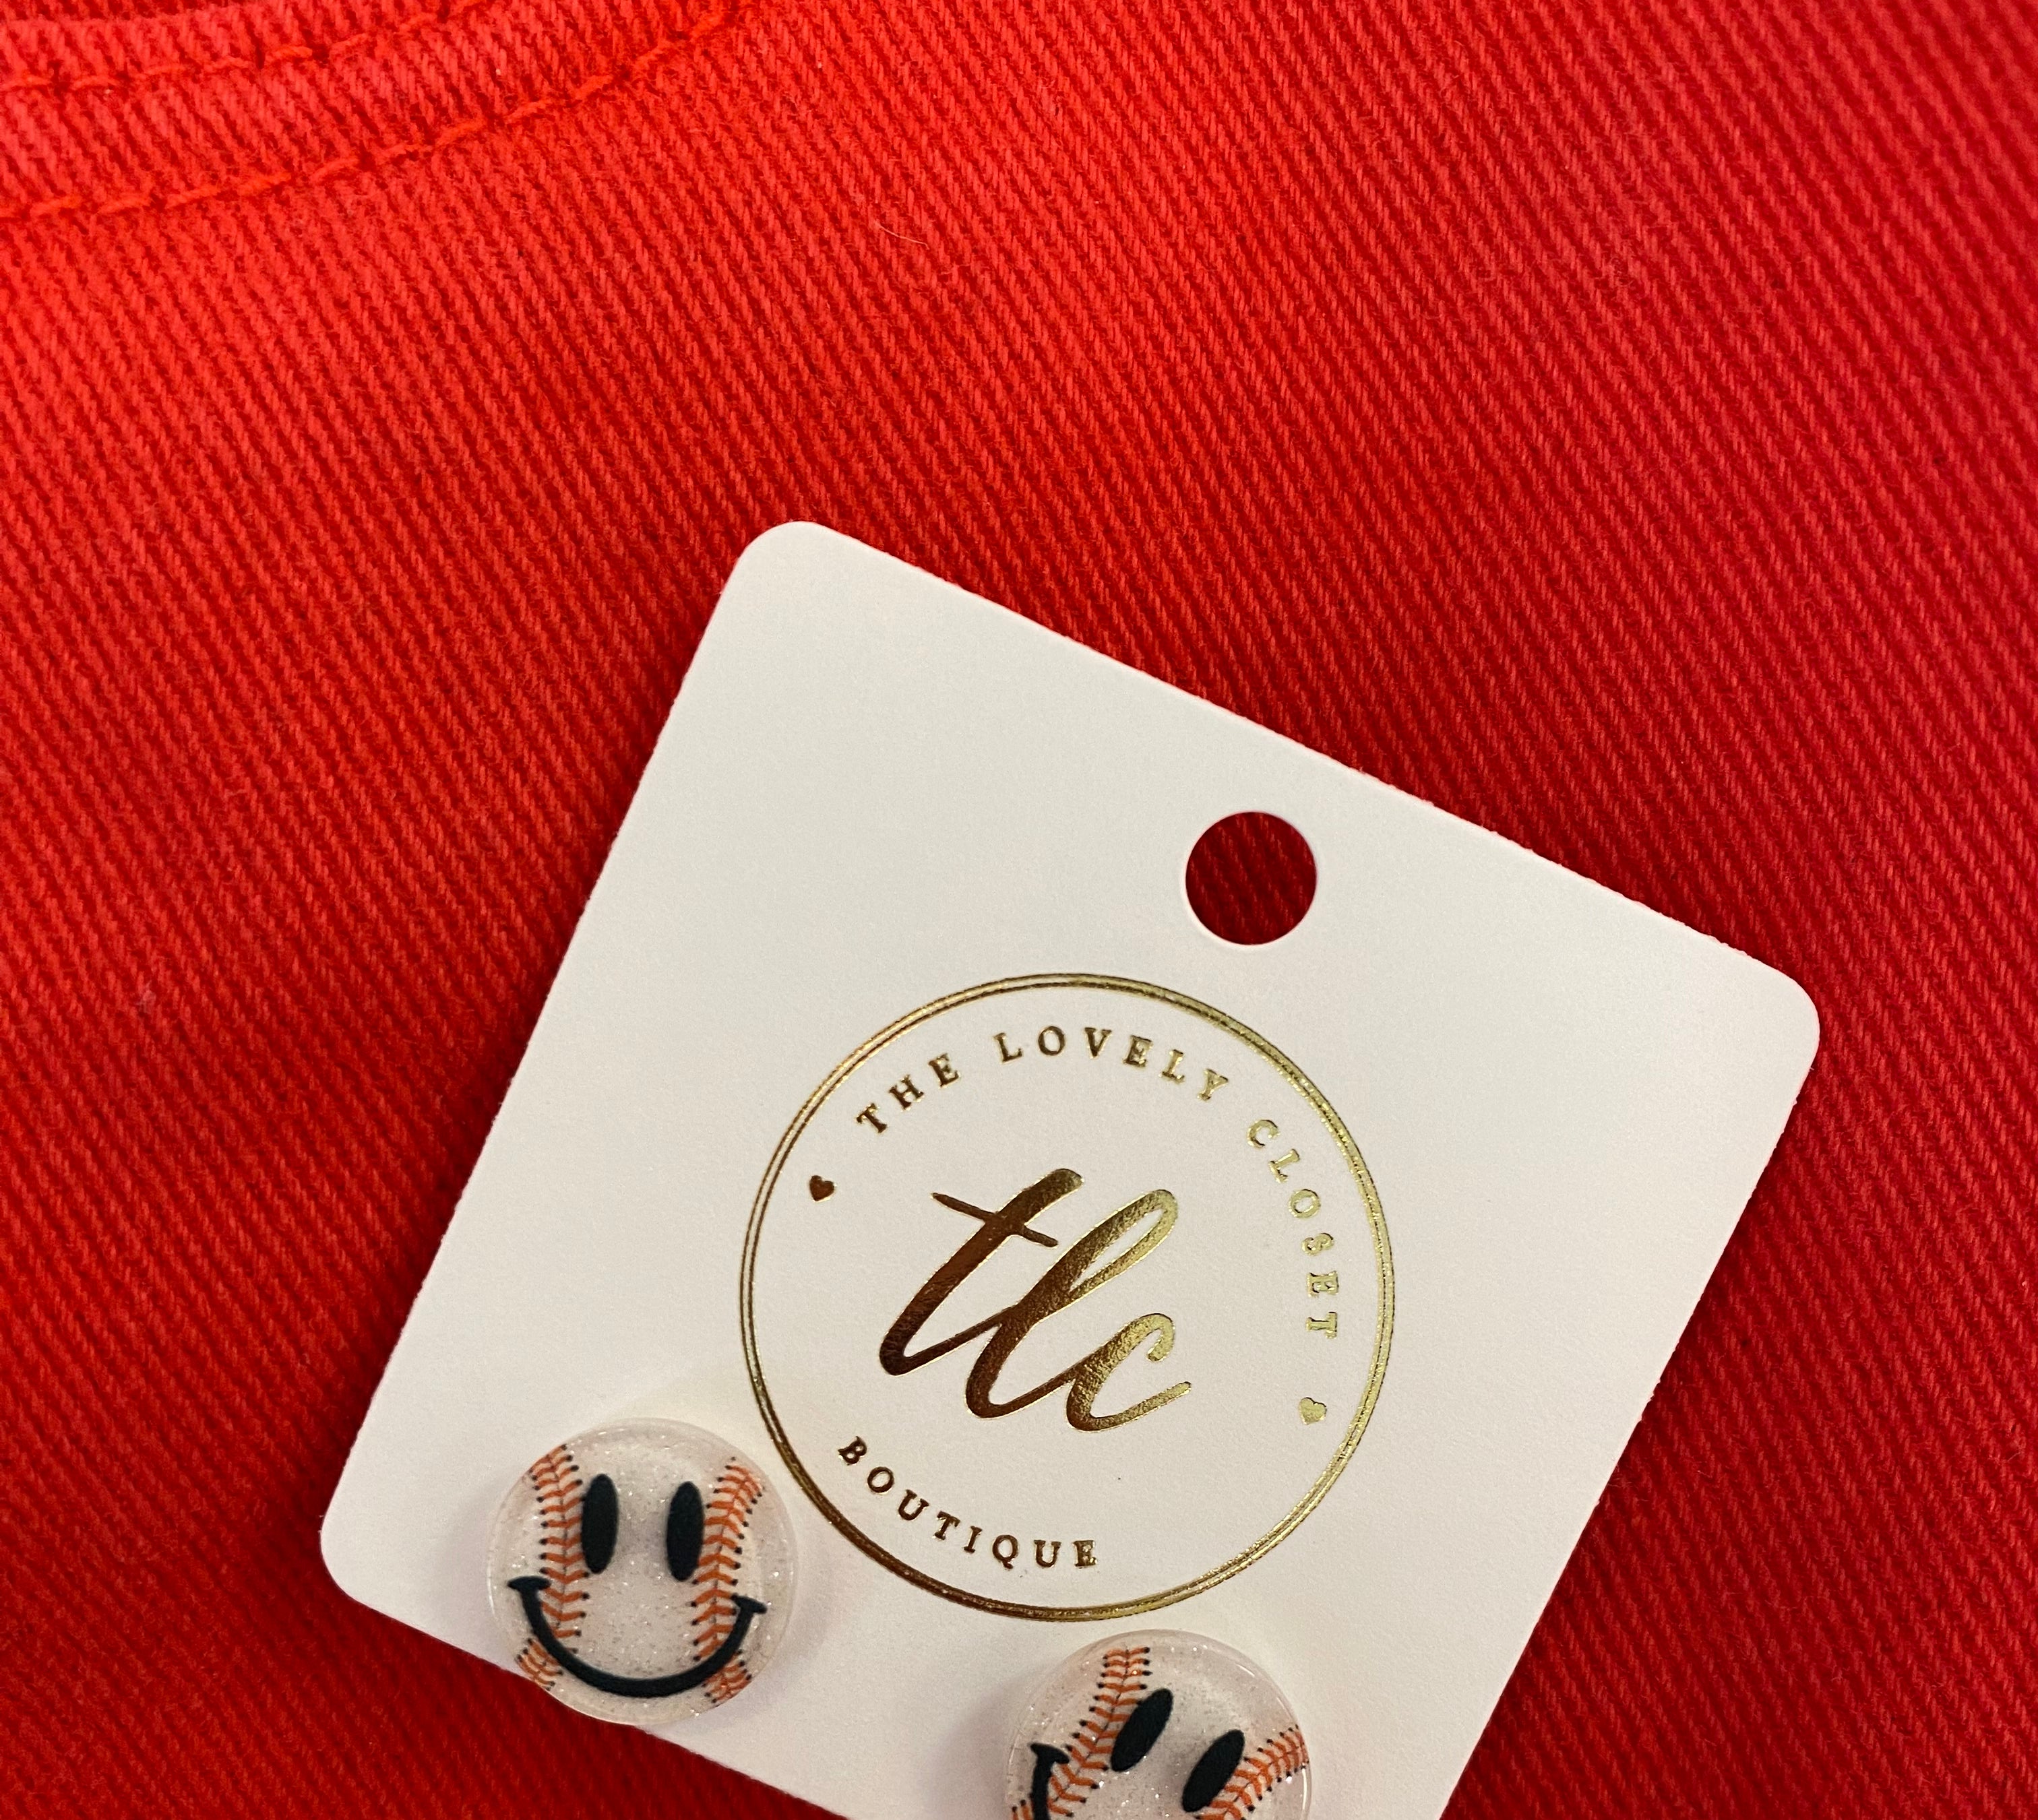 Baseball Babe Earrings-The Lovely Closet-The Lovely Closet, Women's Fashion Boutique in Alexandria, KY